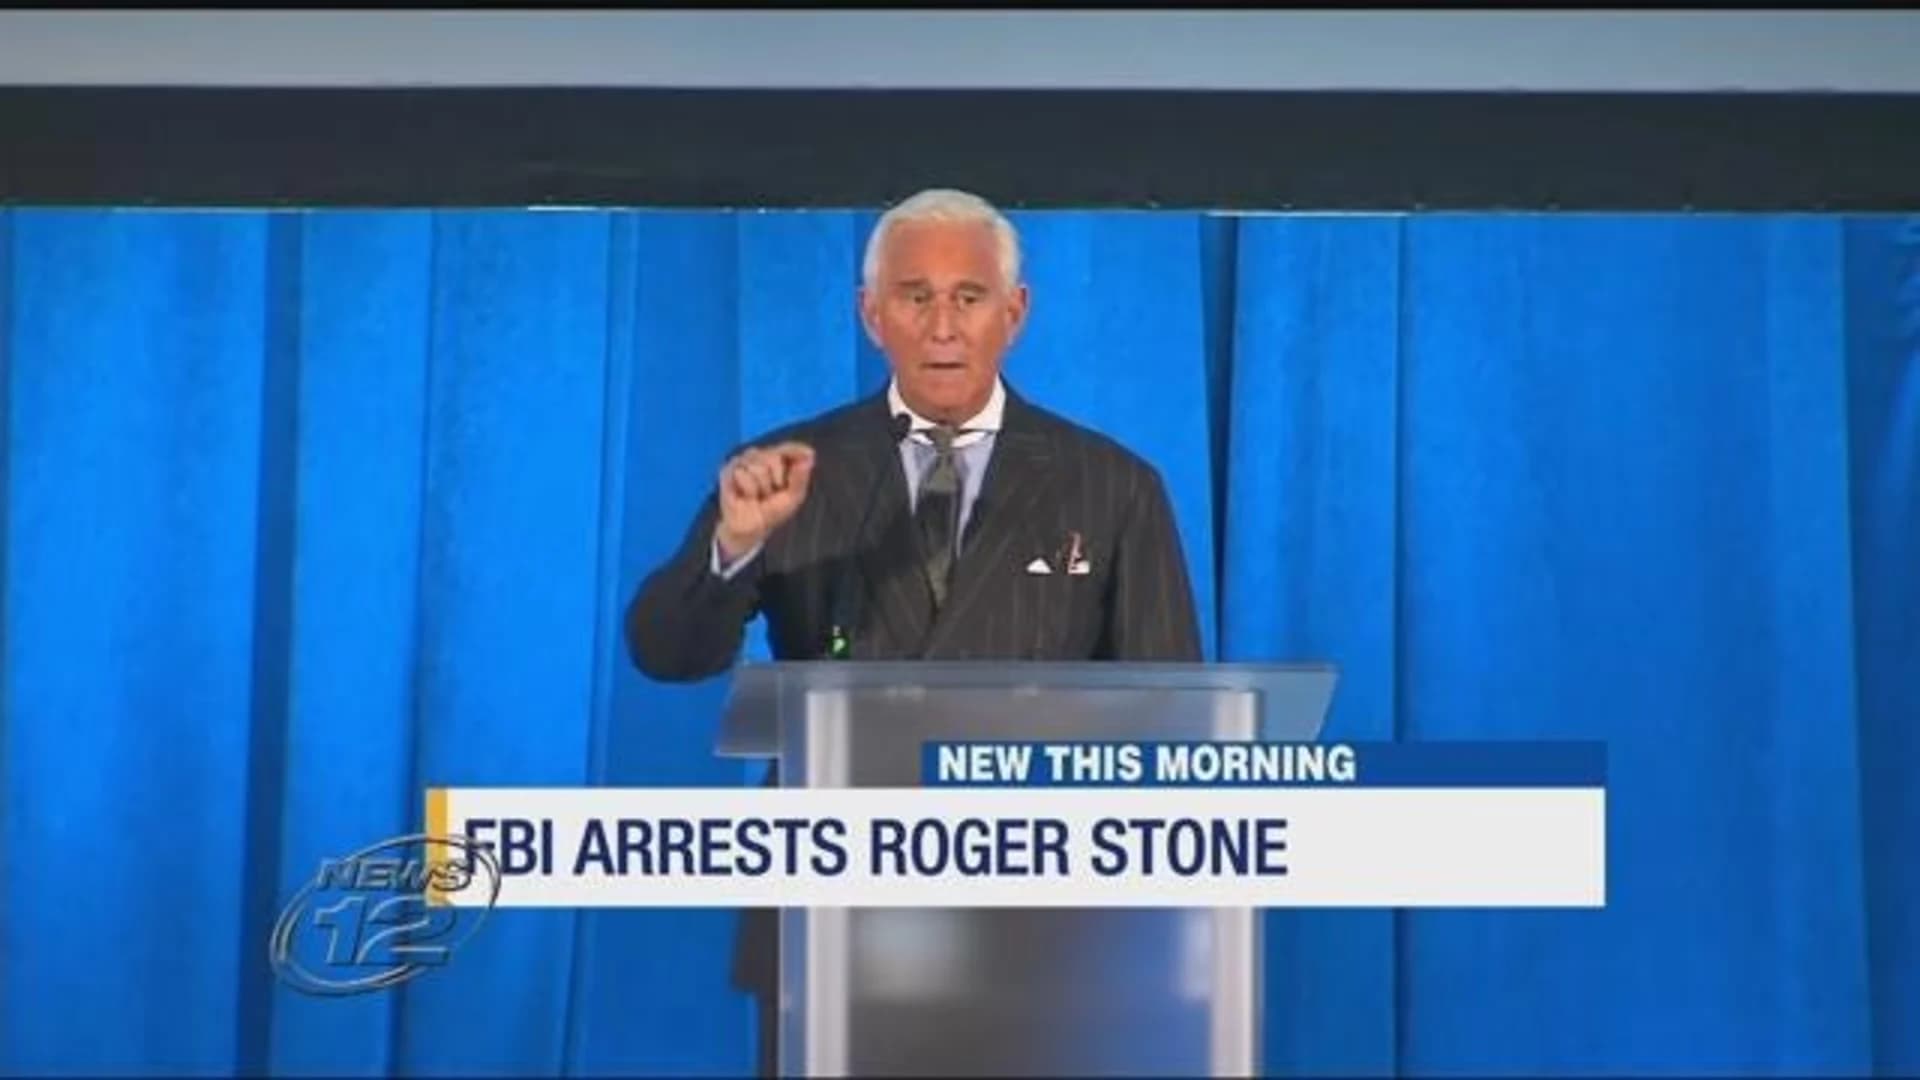 Trump confidant Stone charged with lying about hacked emails